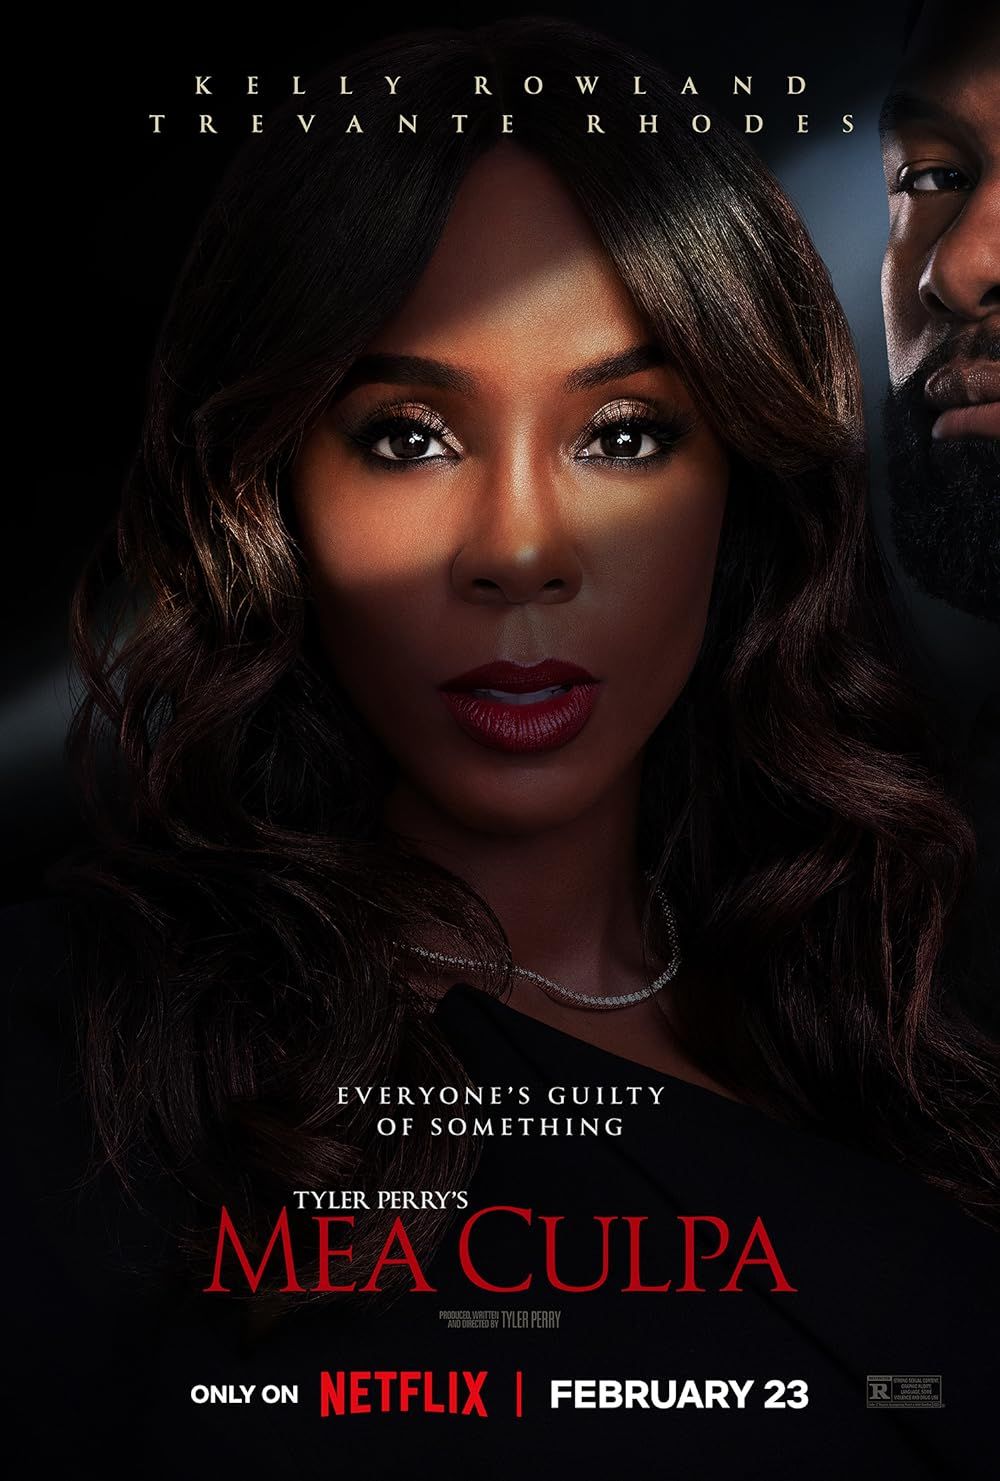 Kelly Rowland Didn't Want to Make the Erotic Thriller Mea Culpa at First